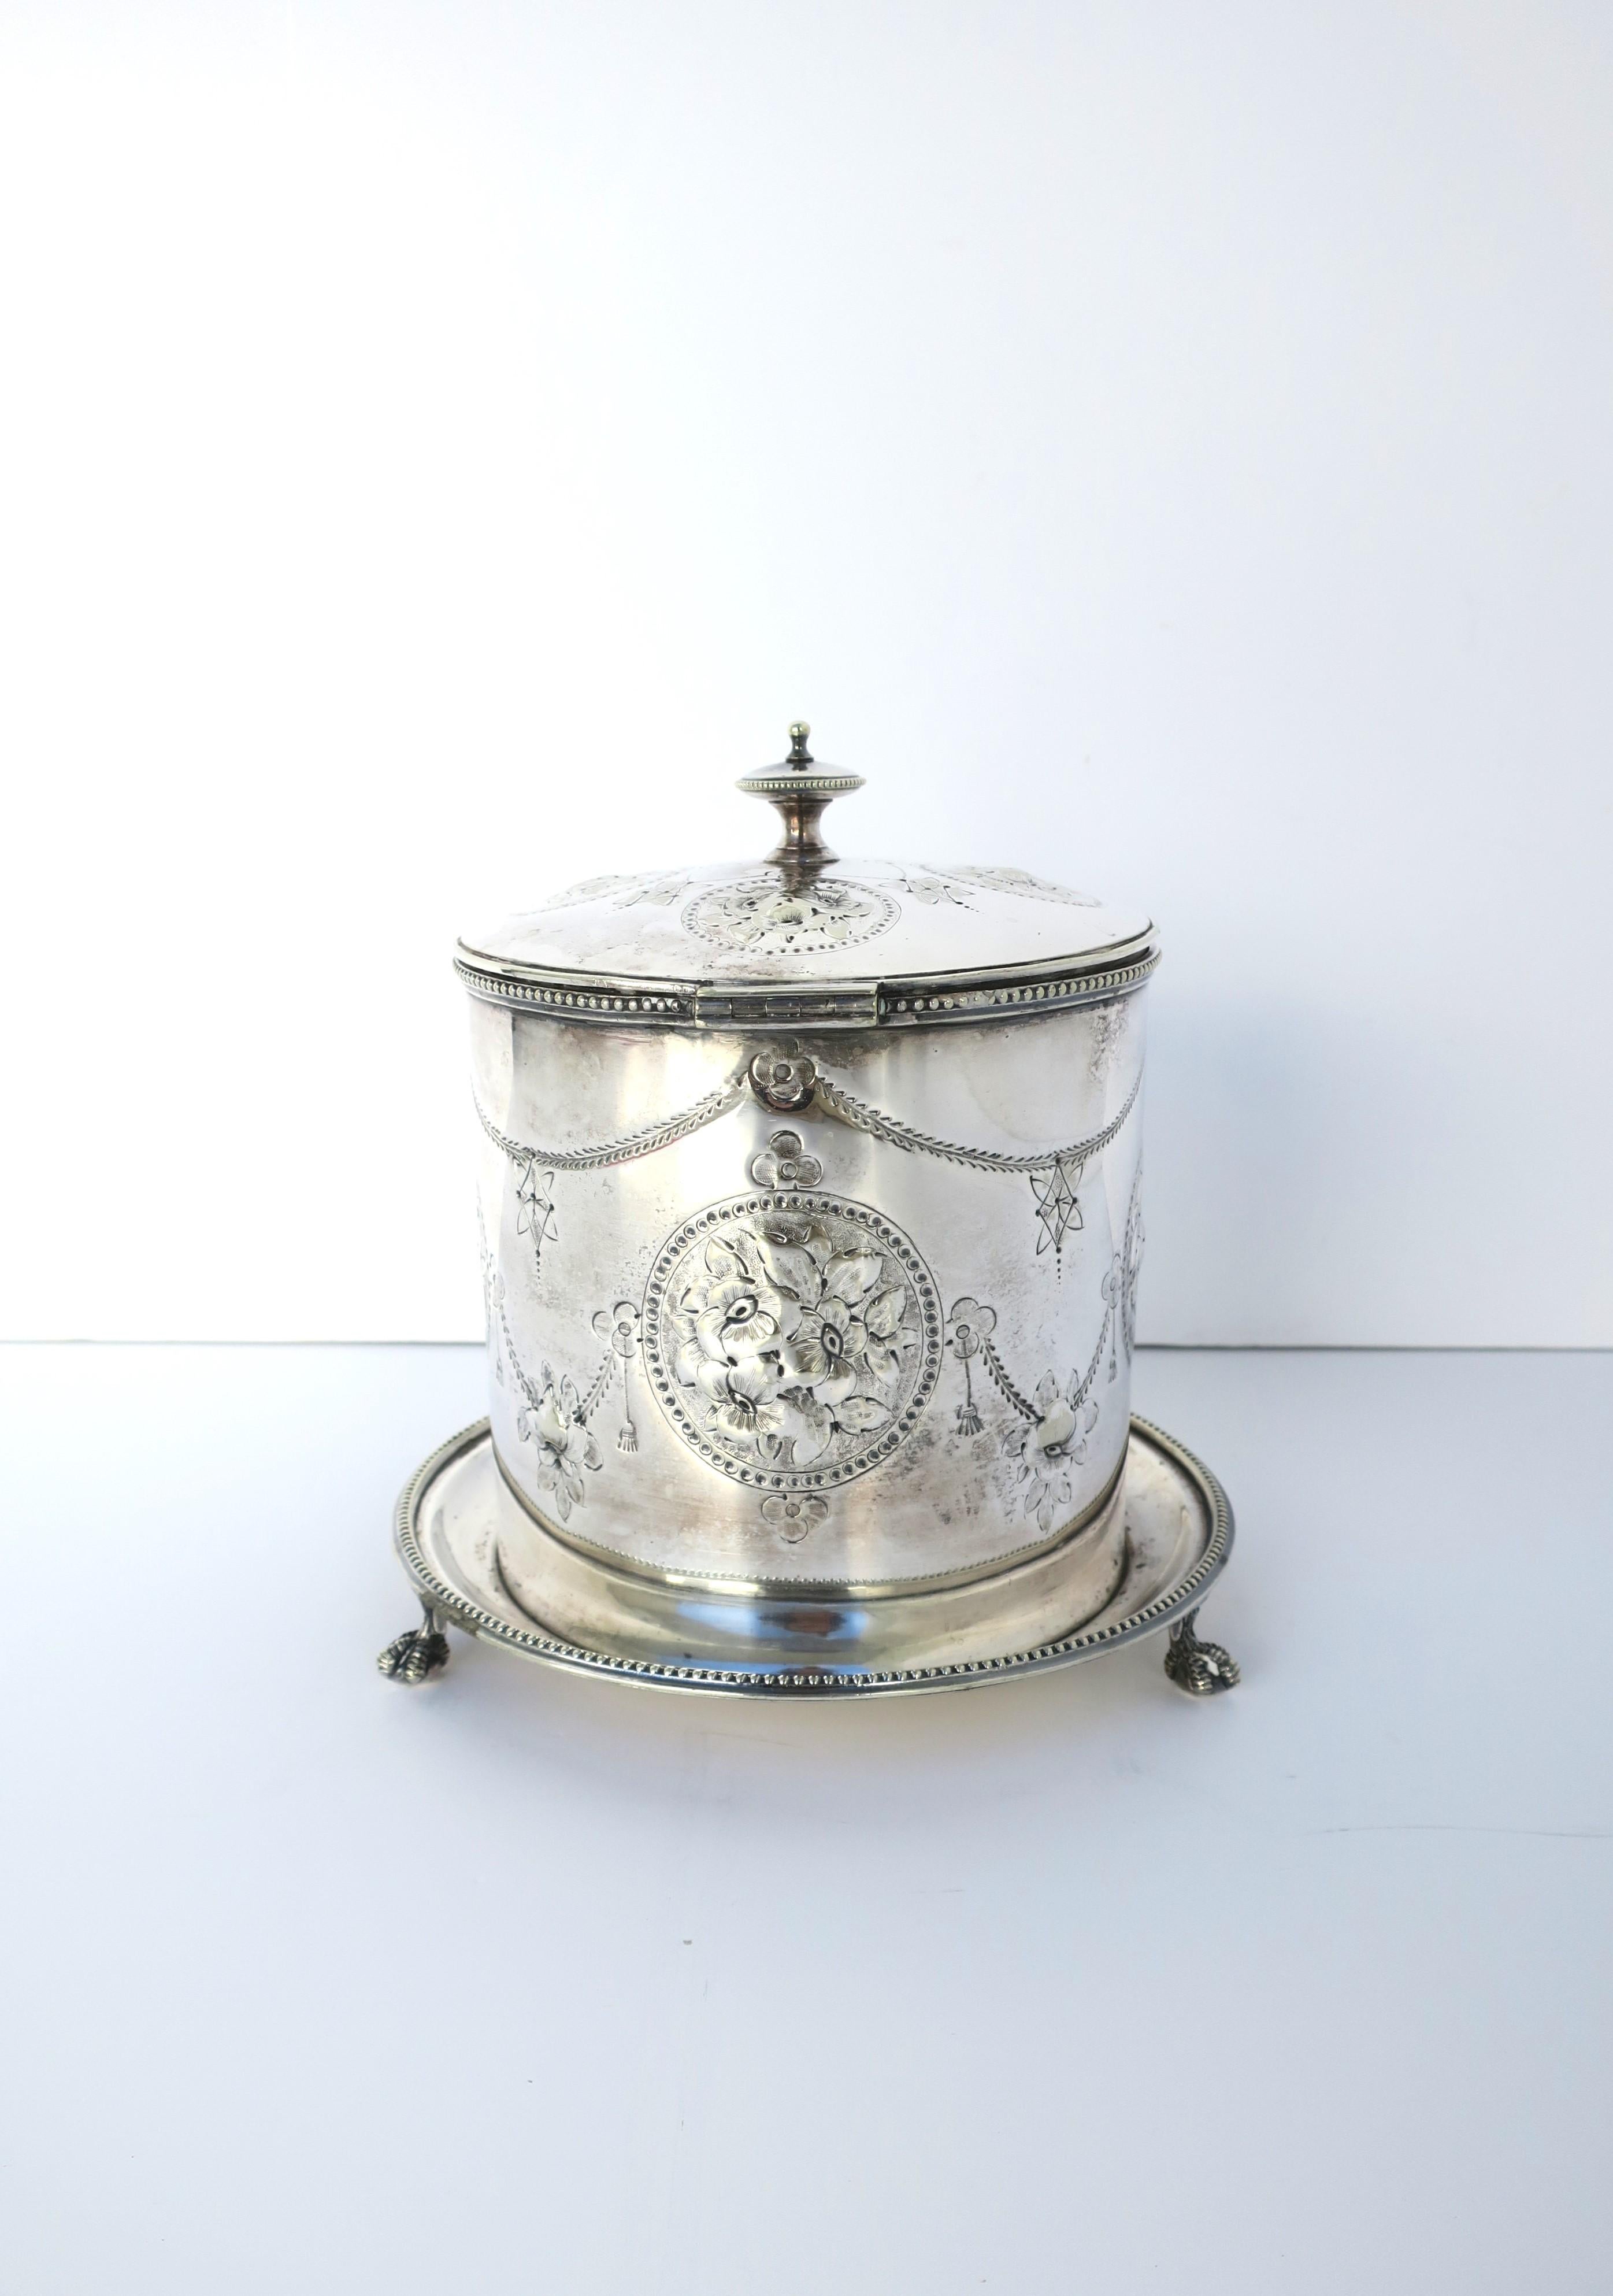 English Silver Plate Covered Biscuit Box or Tea Caddy For Sale 4